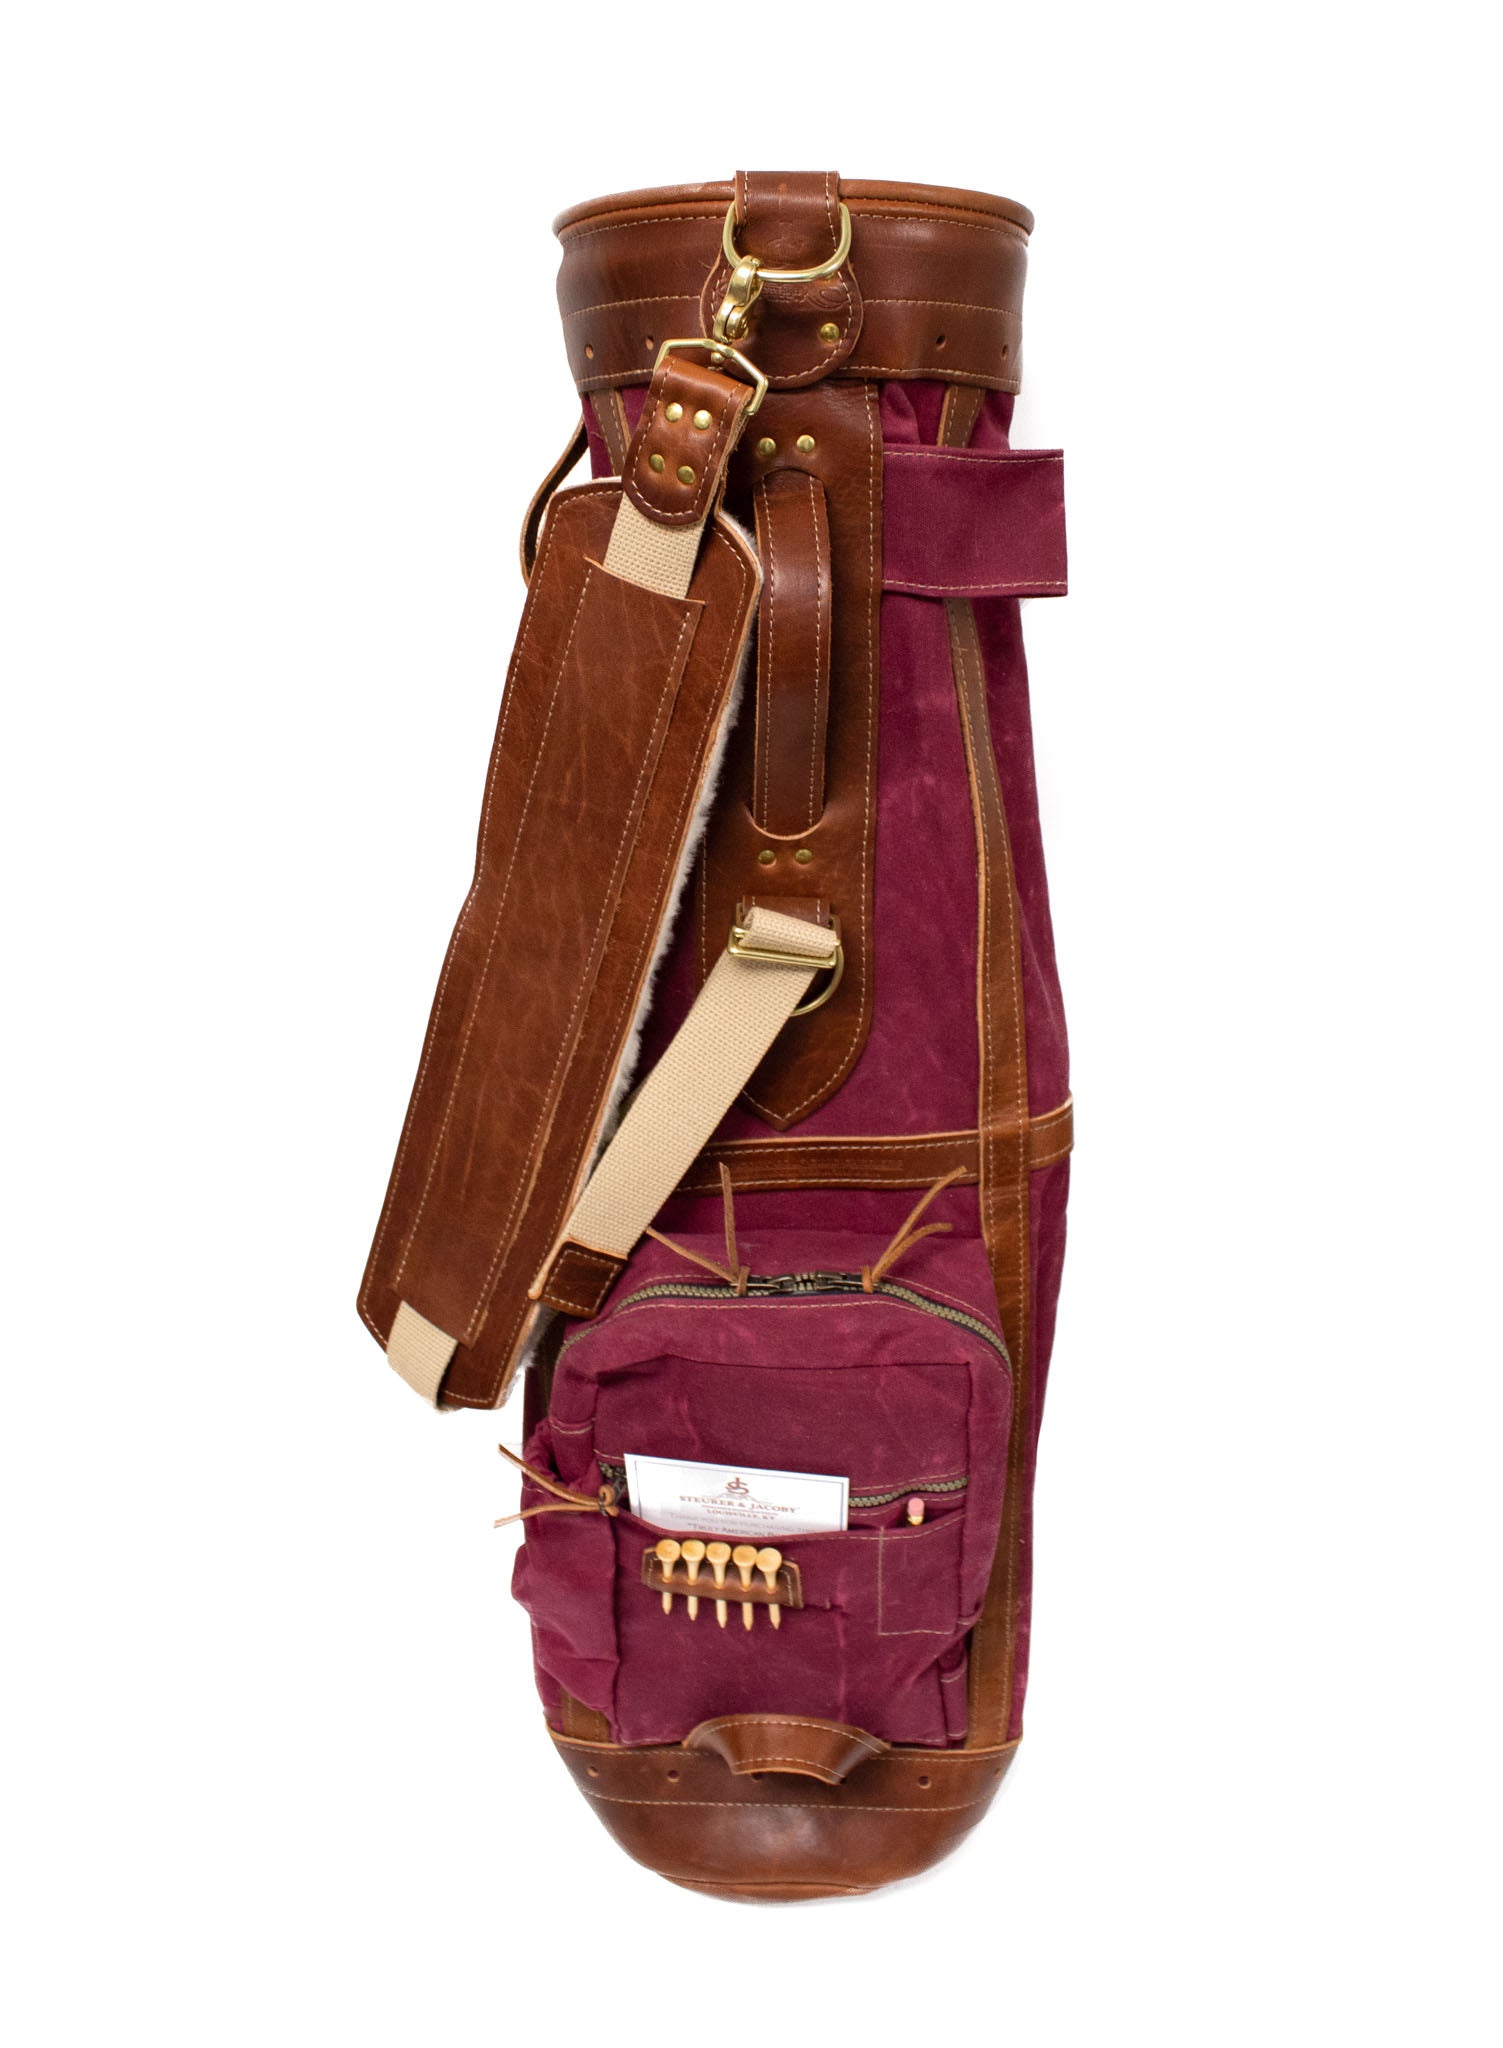 Burgundy & Natural Leather Caddy Style Golf Bag- Steurer & Jacoby